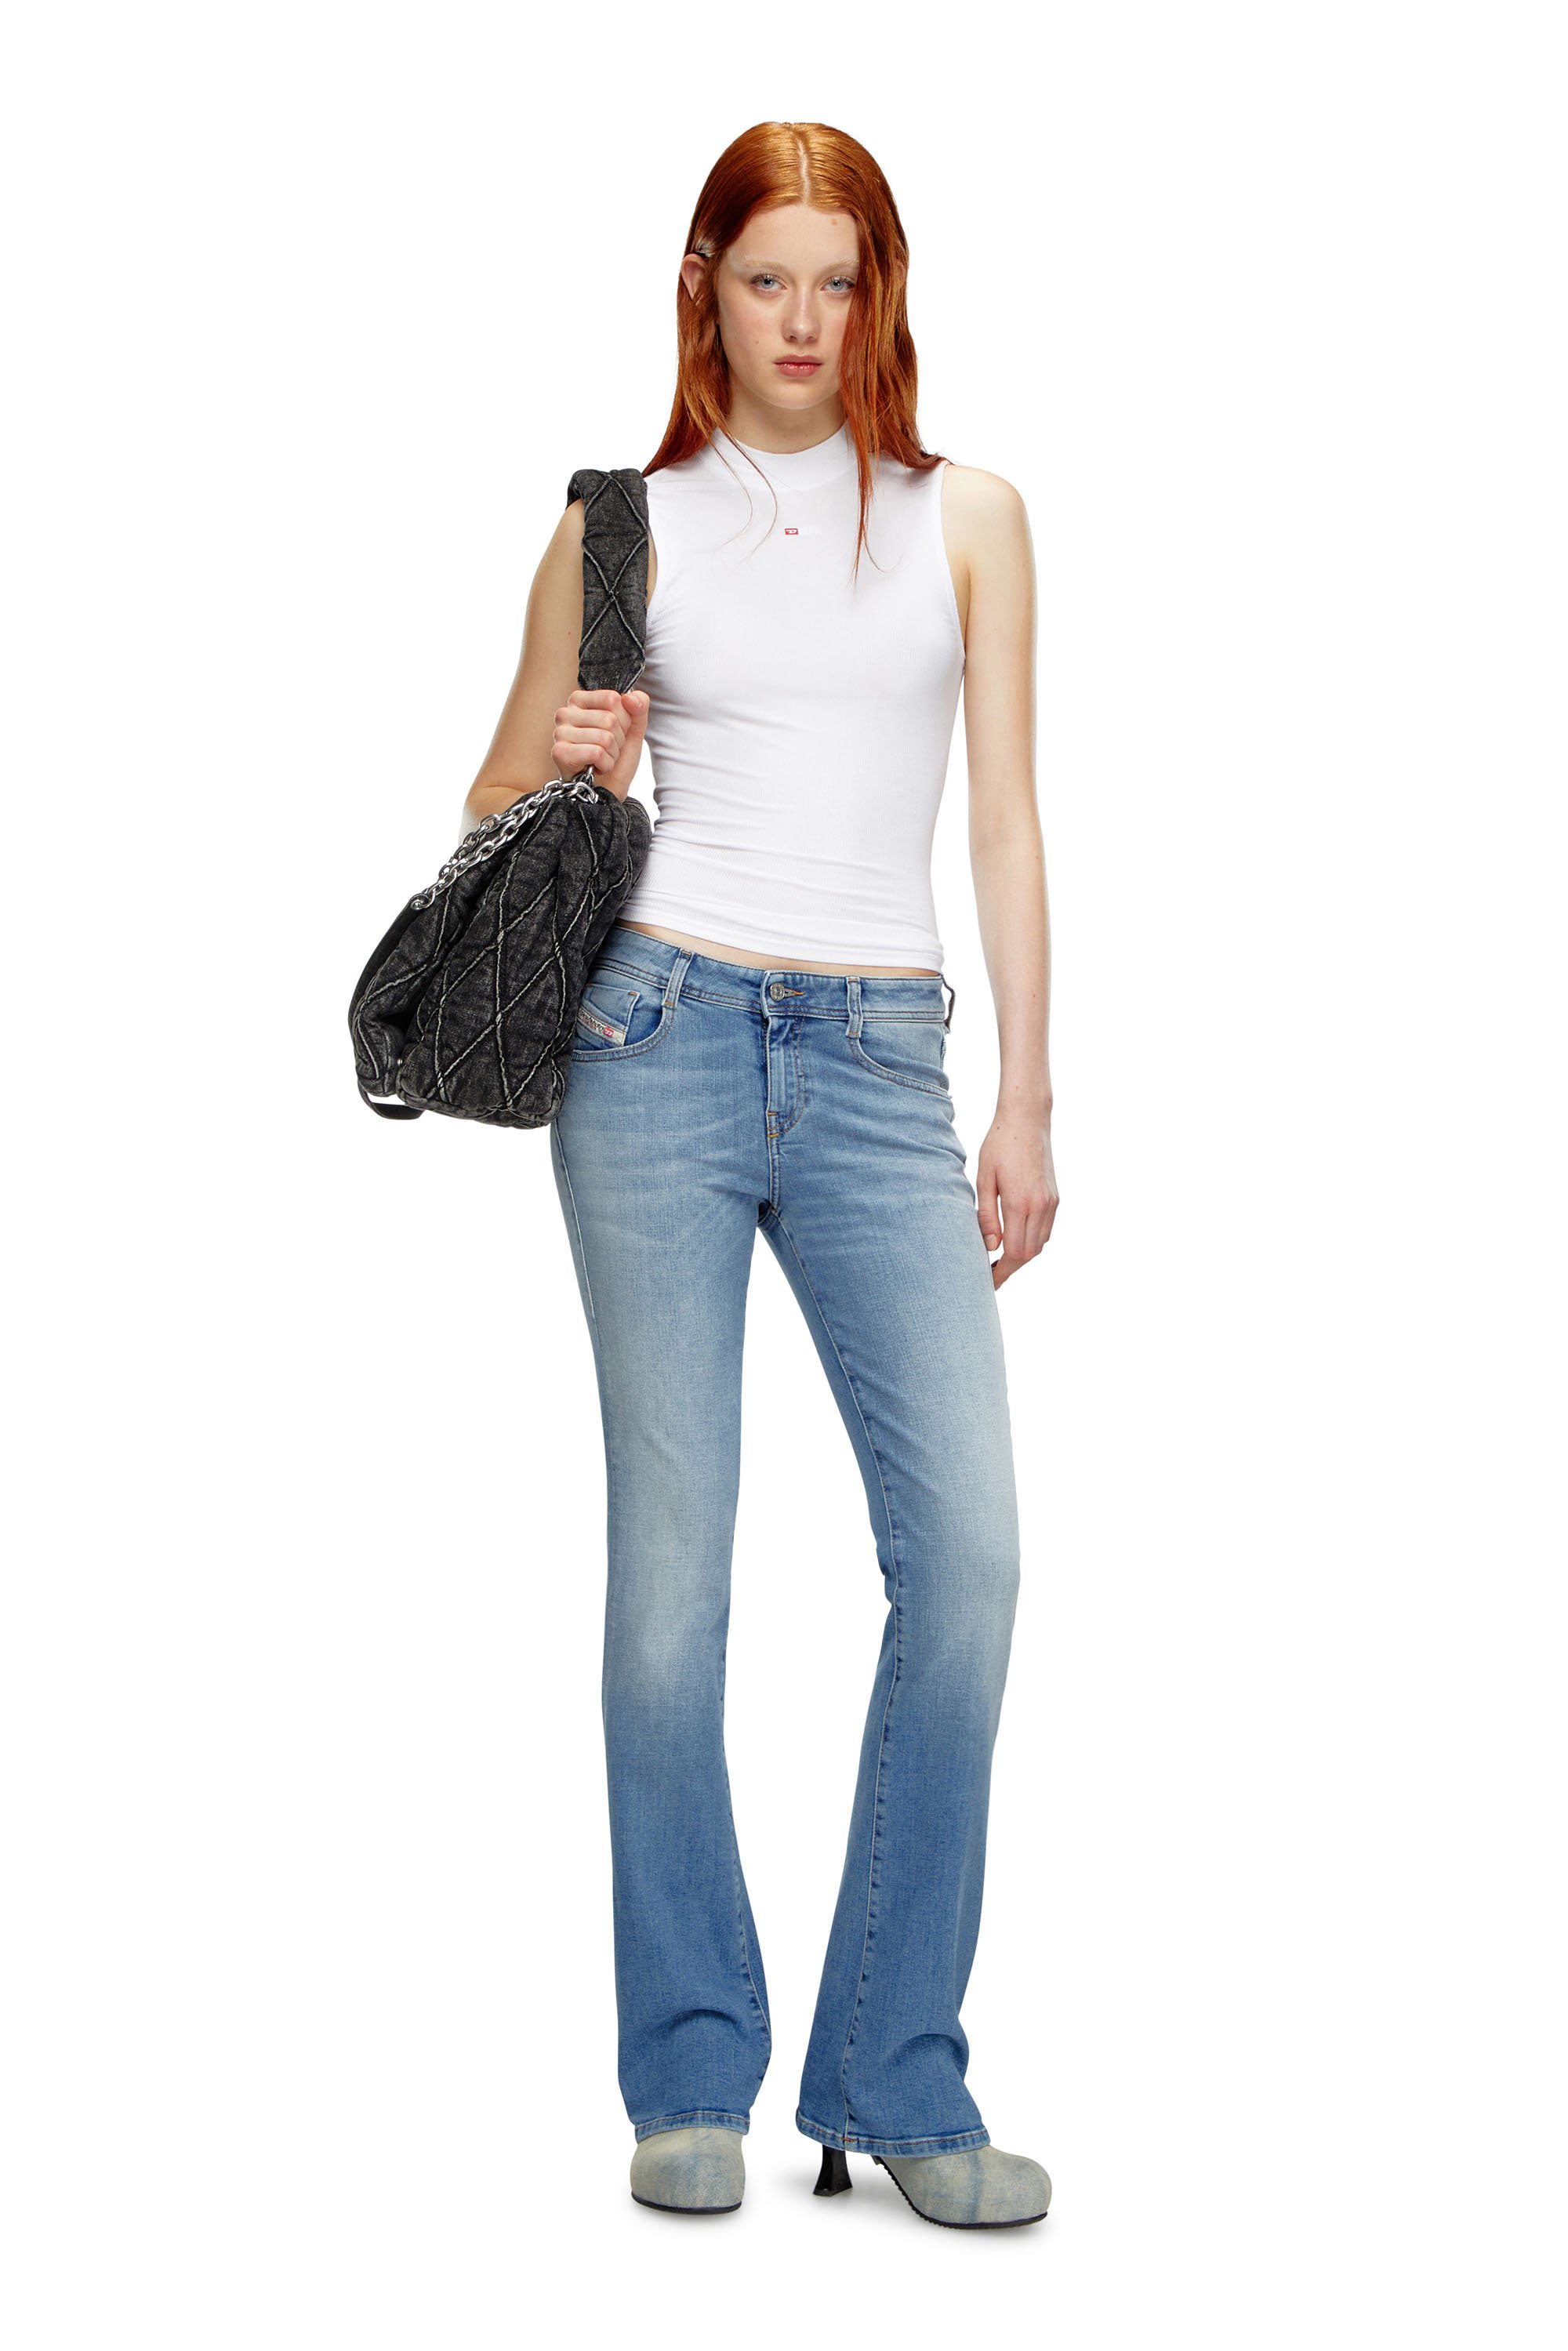 Diesel - Bootcut and Flare Jeans 1969 D-Ebbey 09K06, Mujer Bootcut y Flare Jeans - 1969 D-Ebbey in Azul marino - Image 2